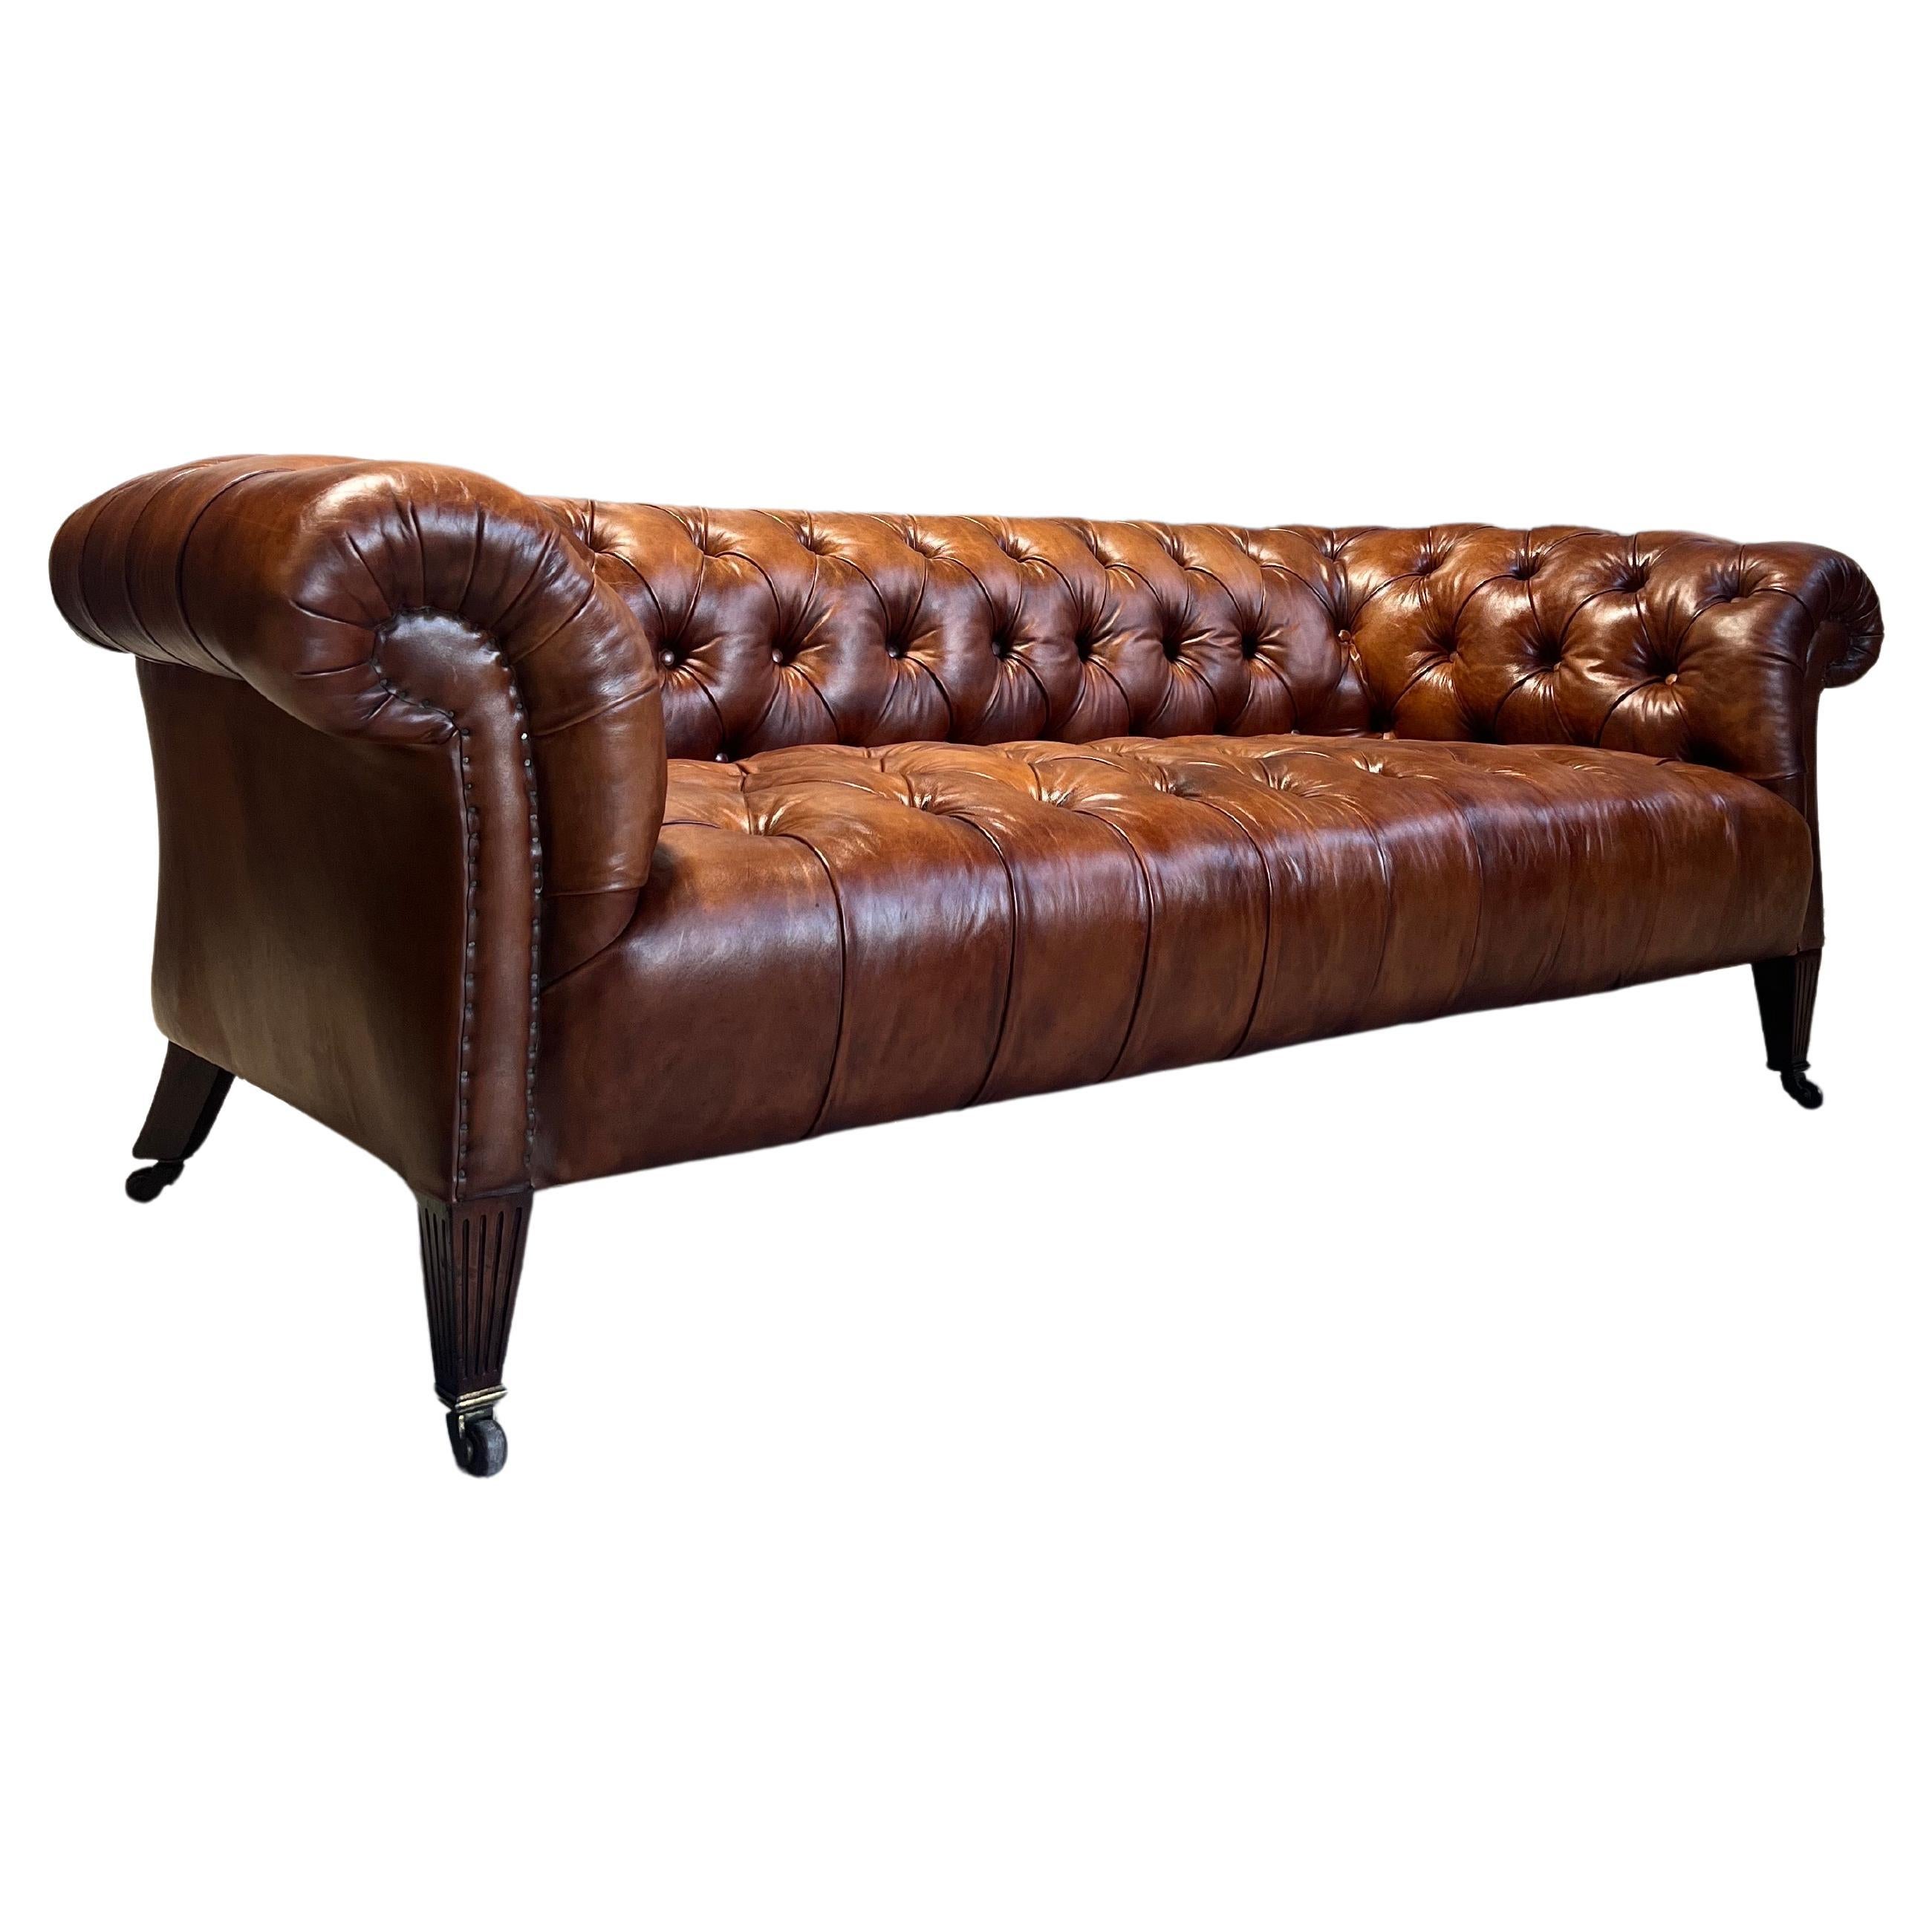 19thC Antique Hamptons & Sons Chesterfield Sofa In Hand Dyed Whiskey Leather